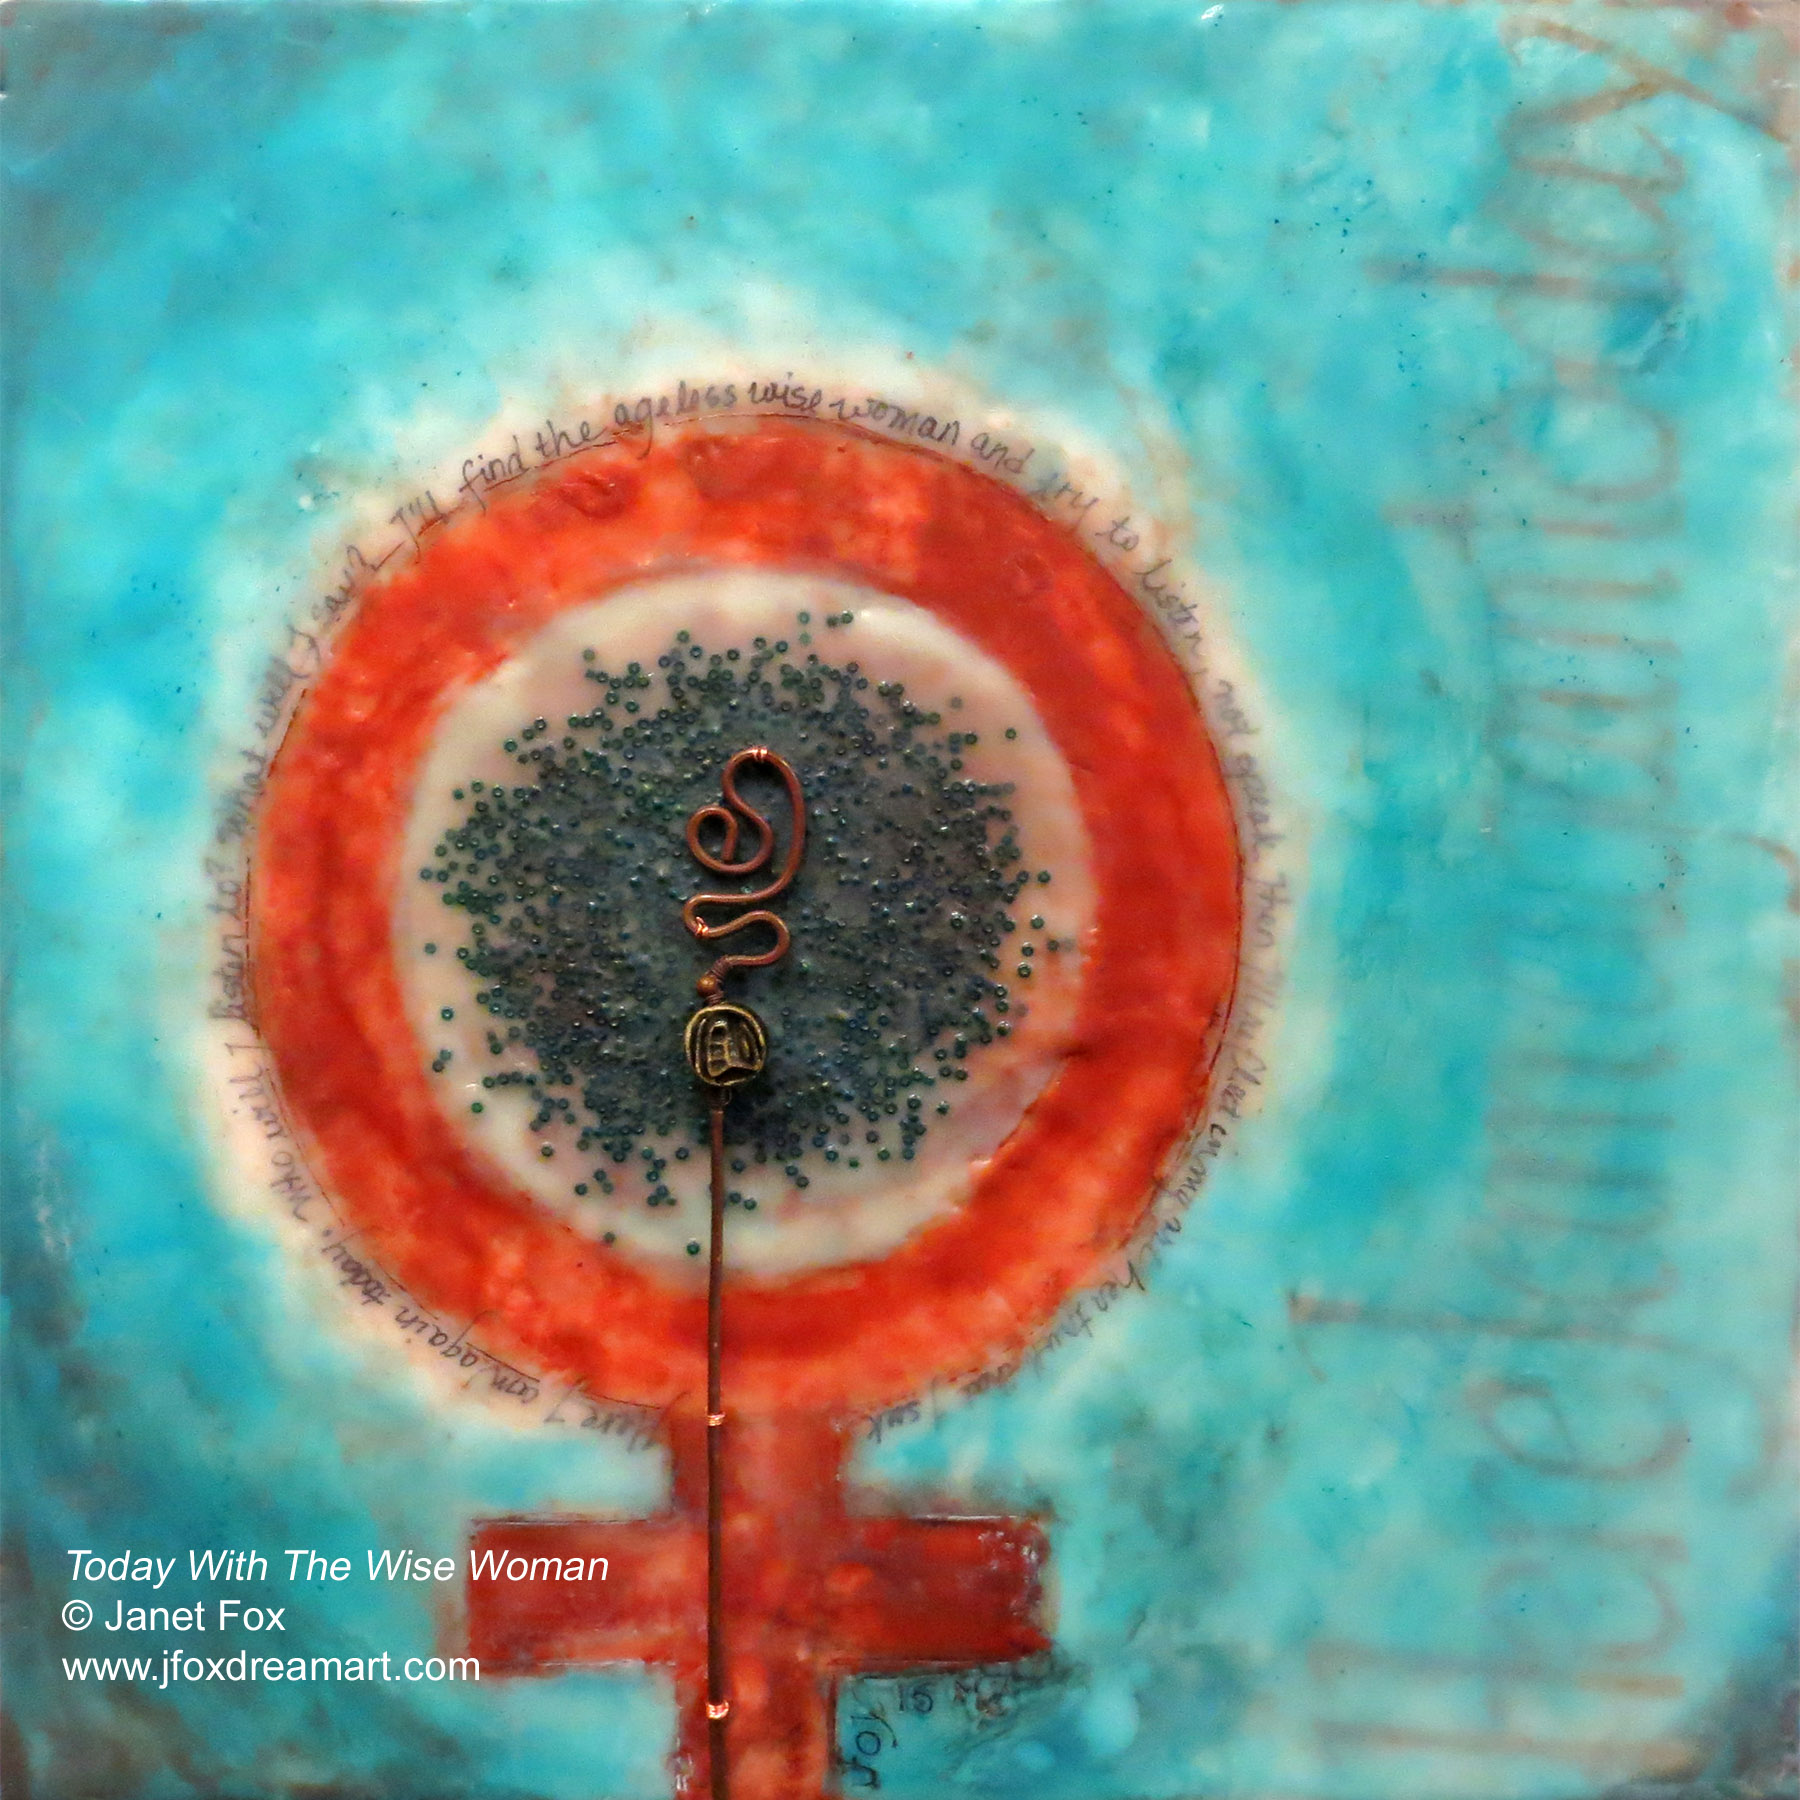 Image of an encaustic painting by Janet Fox titled "Today With The Wise Woman."